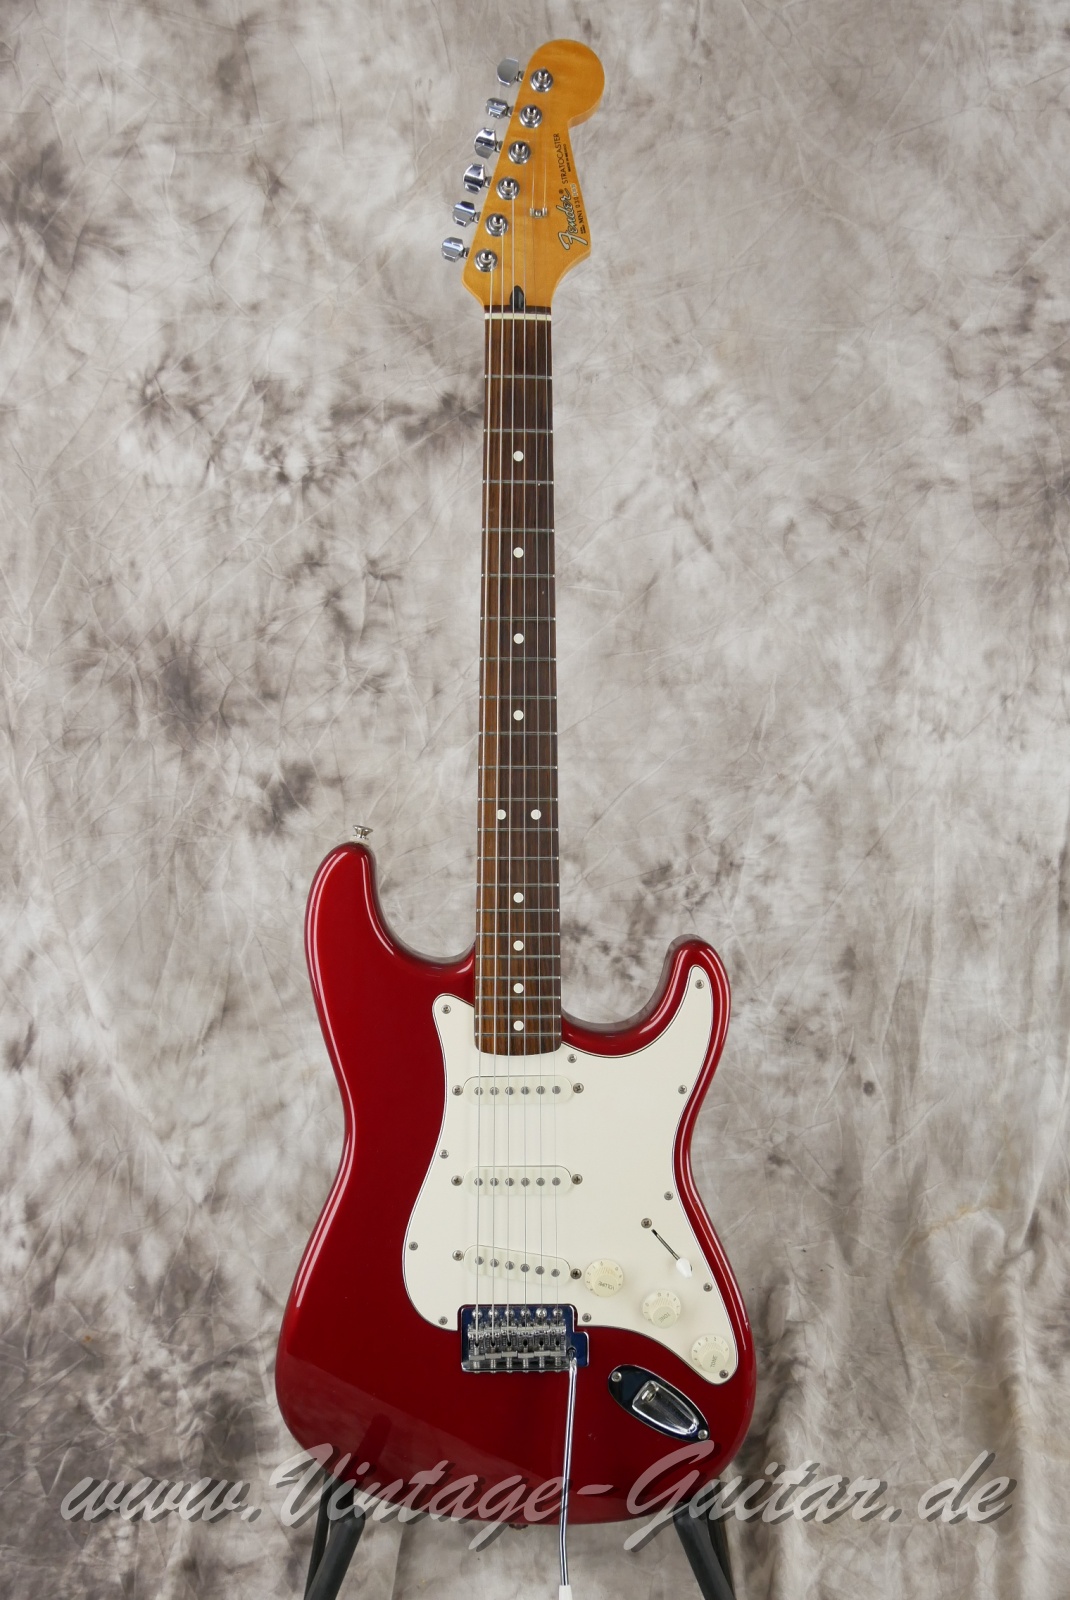 Fender_Stratocaster_Mexico_candy_apple_red_1991-001.JPG